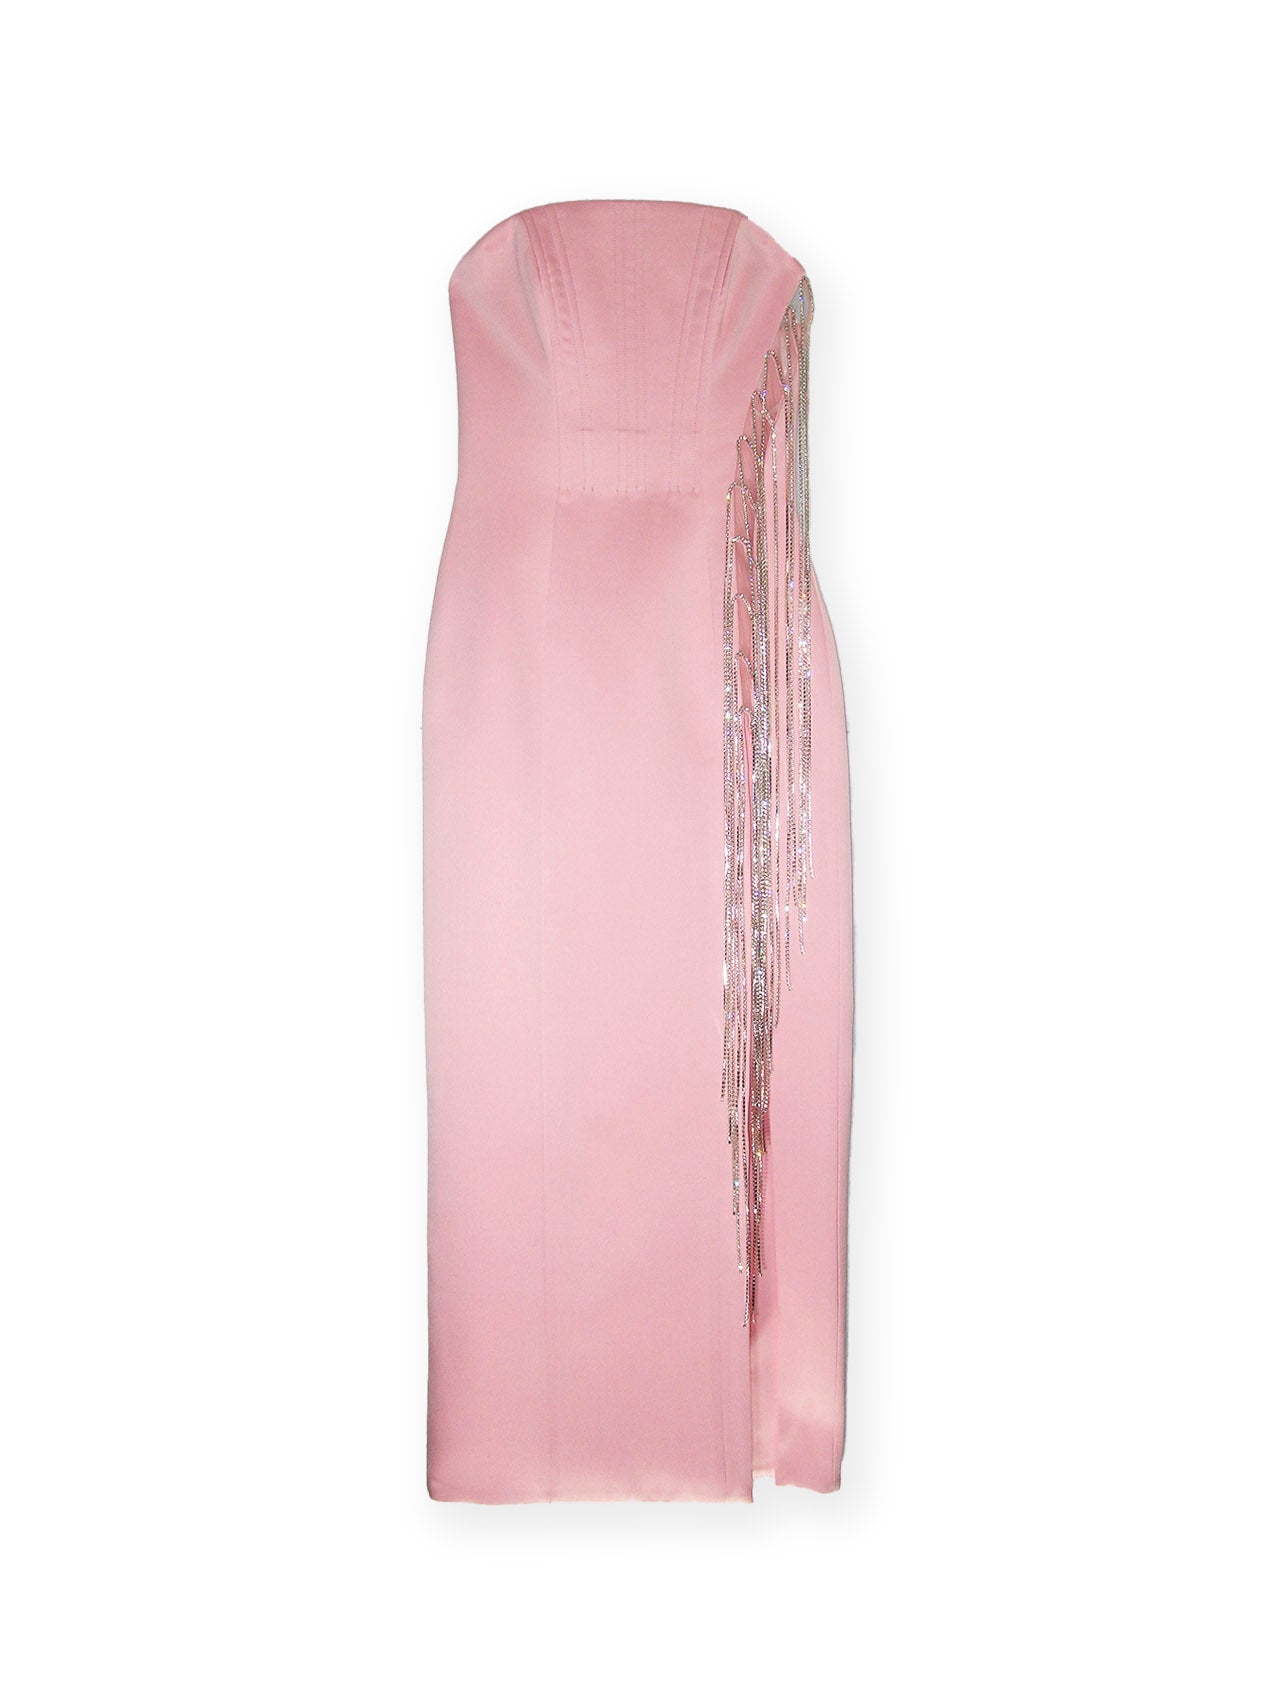 BLOOM MIDI DRESS | POWER PINK; the perfect combination of classic elegance and modern style. This strapless design features a side split and crystal chain fringing for a tasteful touch of shimmer. It also includes corset boning for structure and support, offering a comfortable midi length fit.